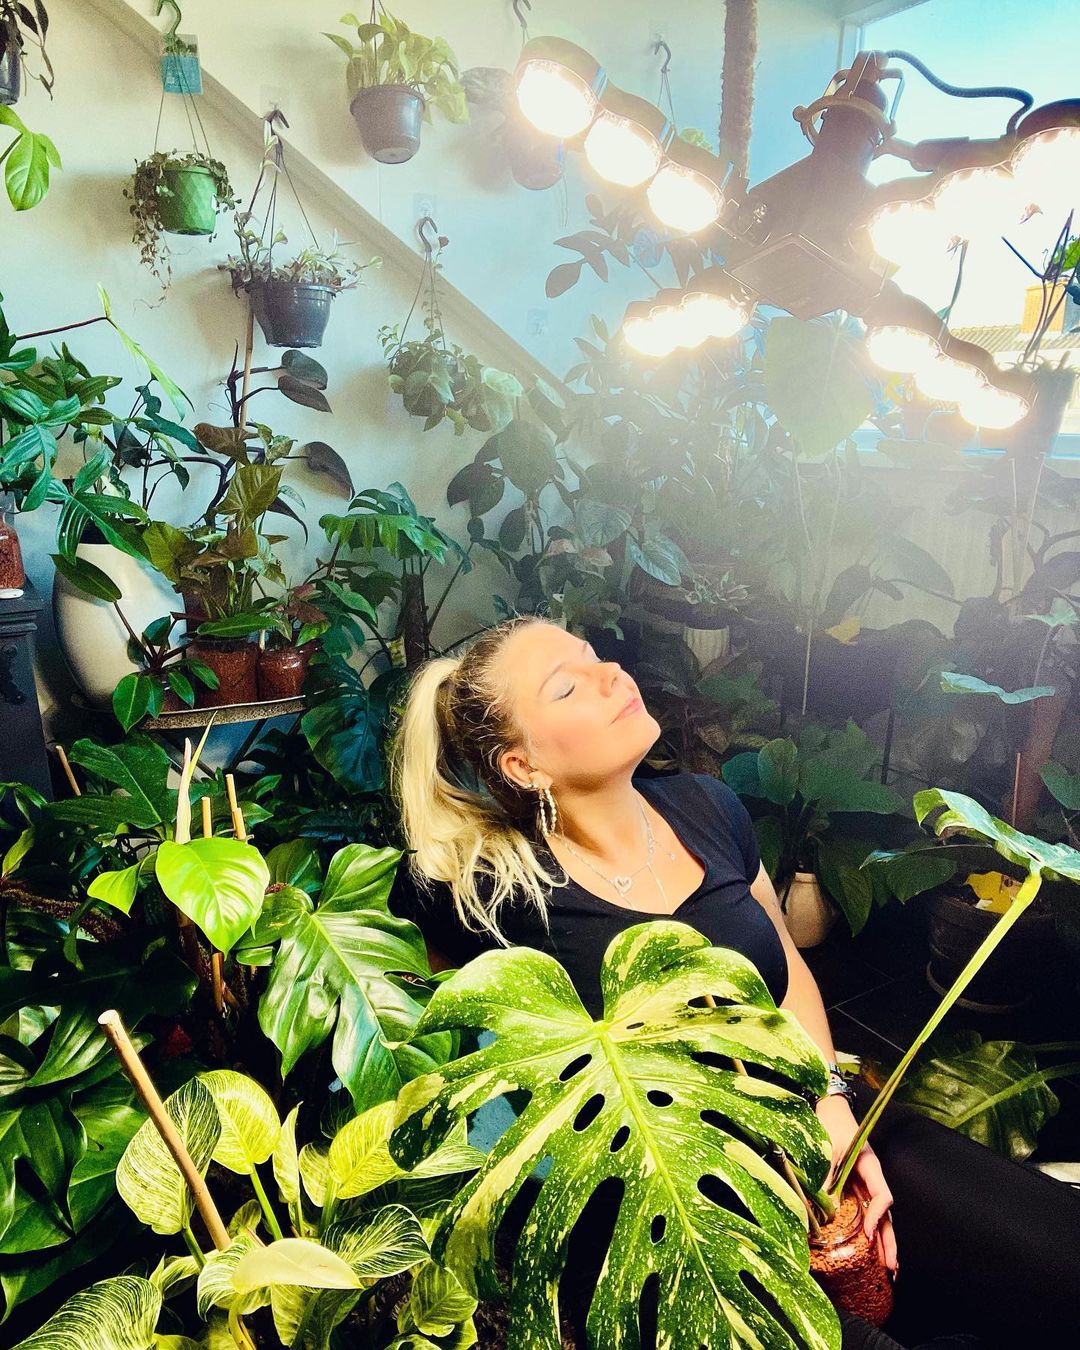 A photo shared by an influencer @junglefever_nl on INS，She stood under the 60W folding wings plant grow light, with her eyes closed, bathed in the light of the plant grow light without any harm, and surrounded by the plants she planted, which was very artistic.